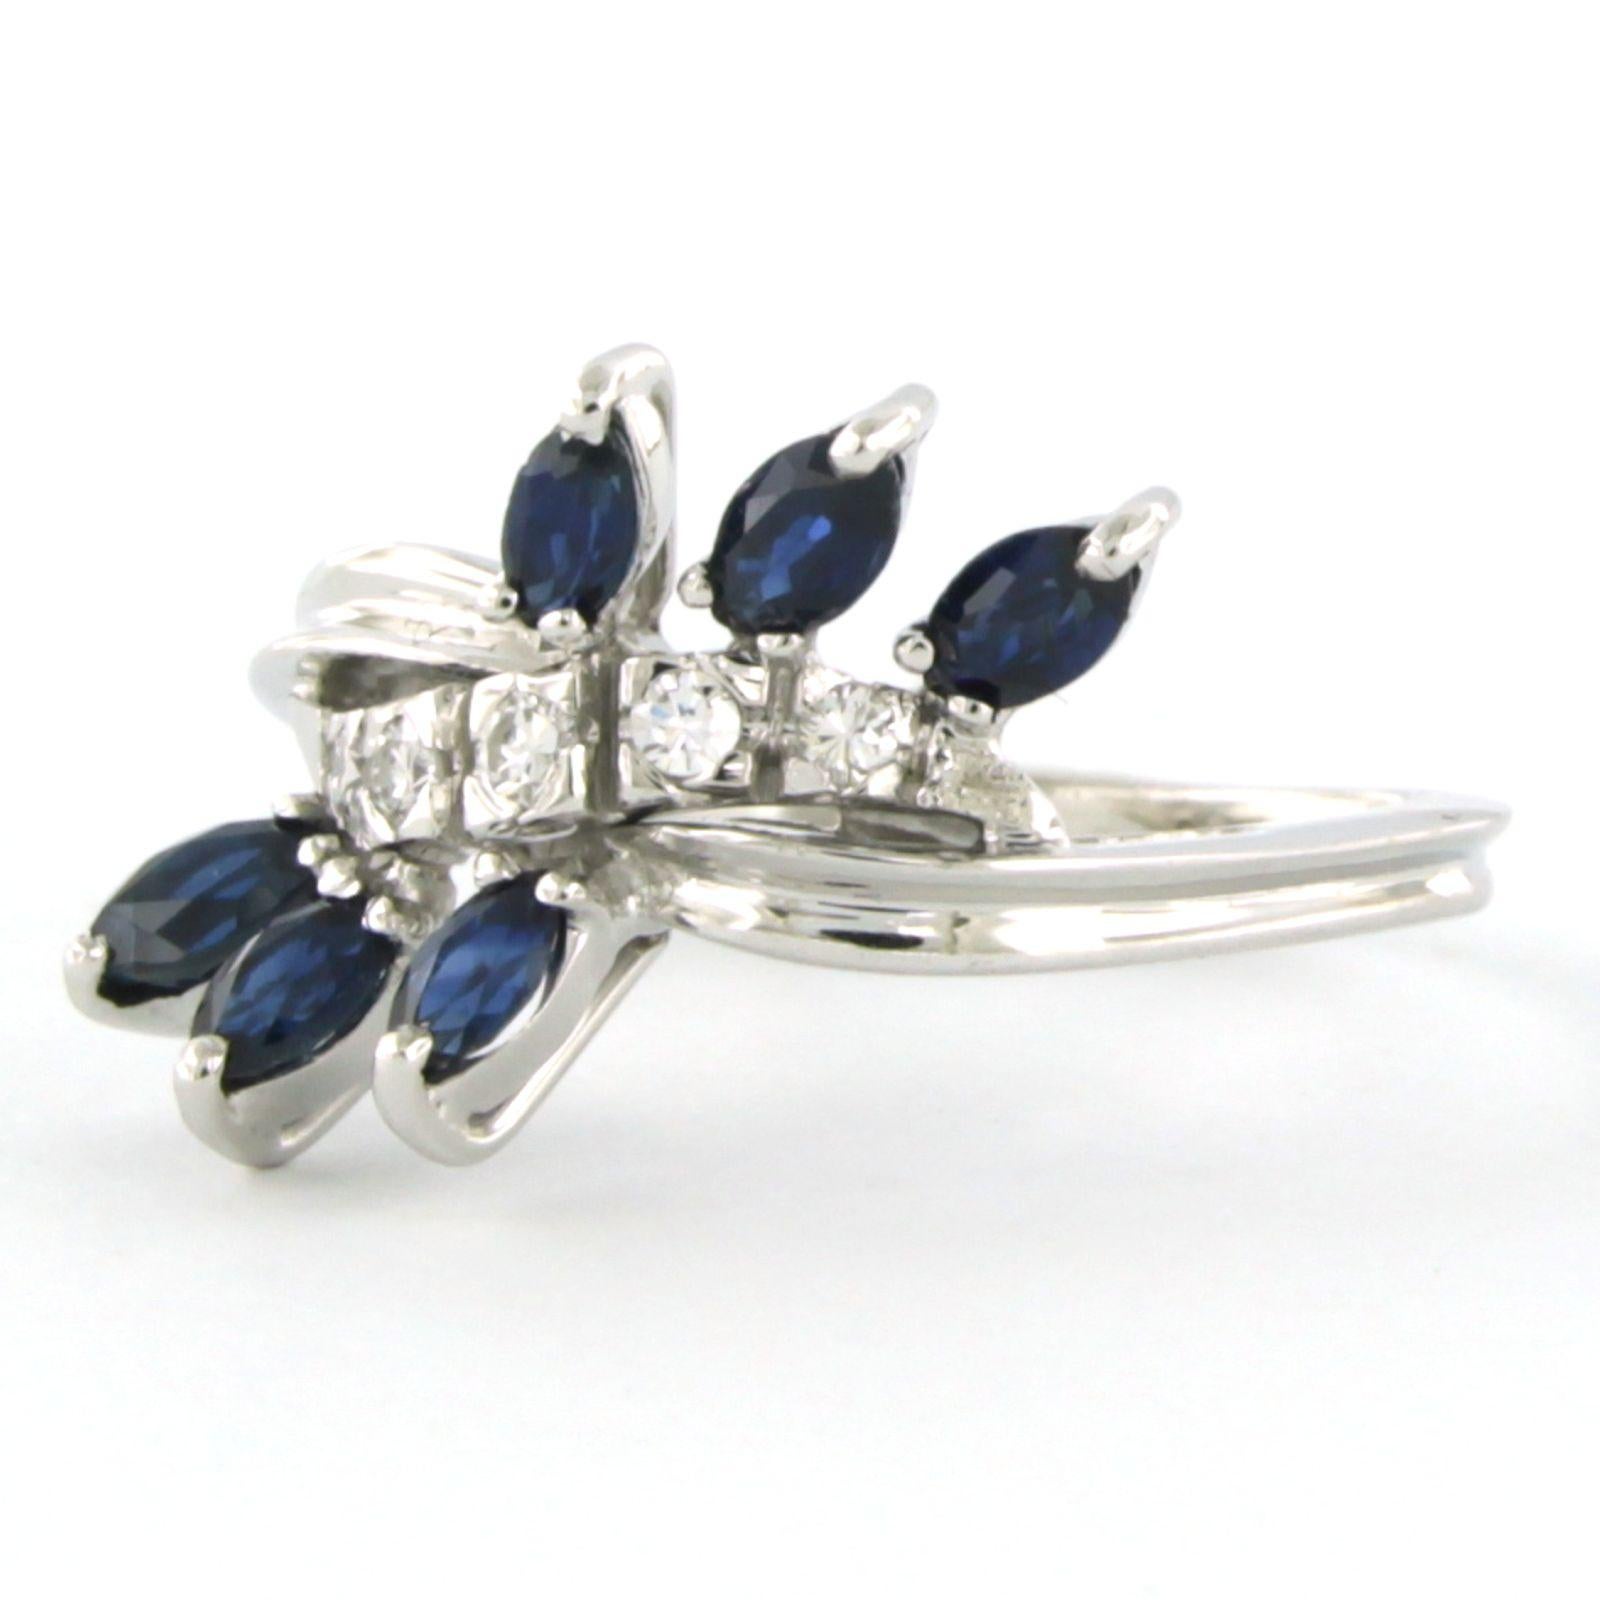 Brilliant Cut Ring with sapphire and diamonds 18k white gold